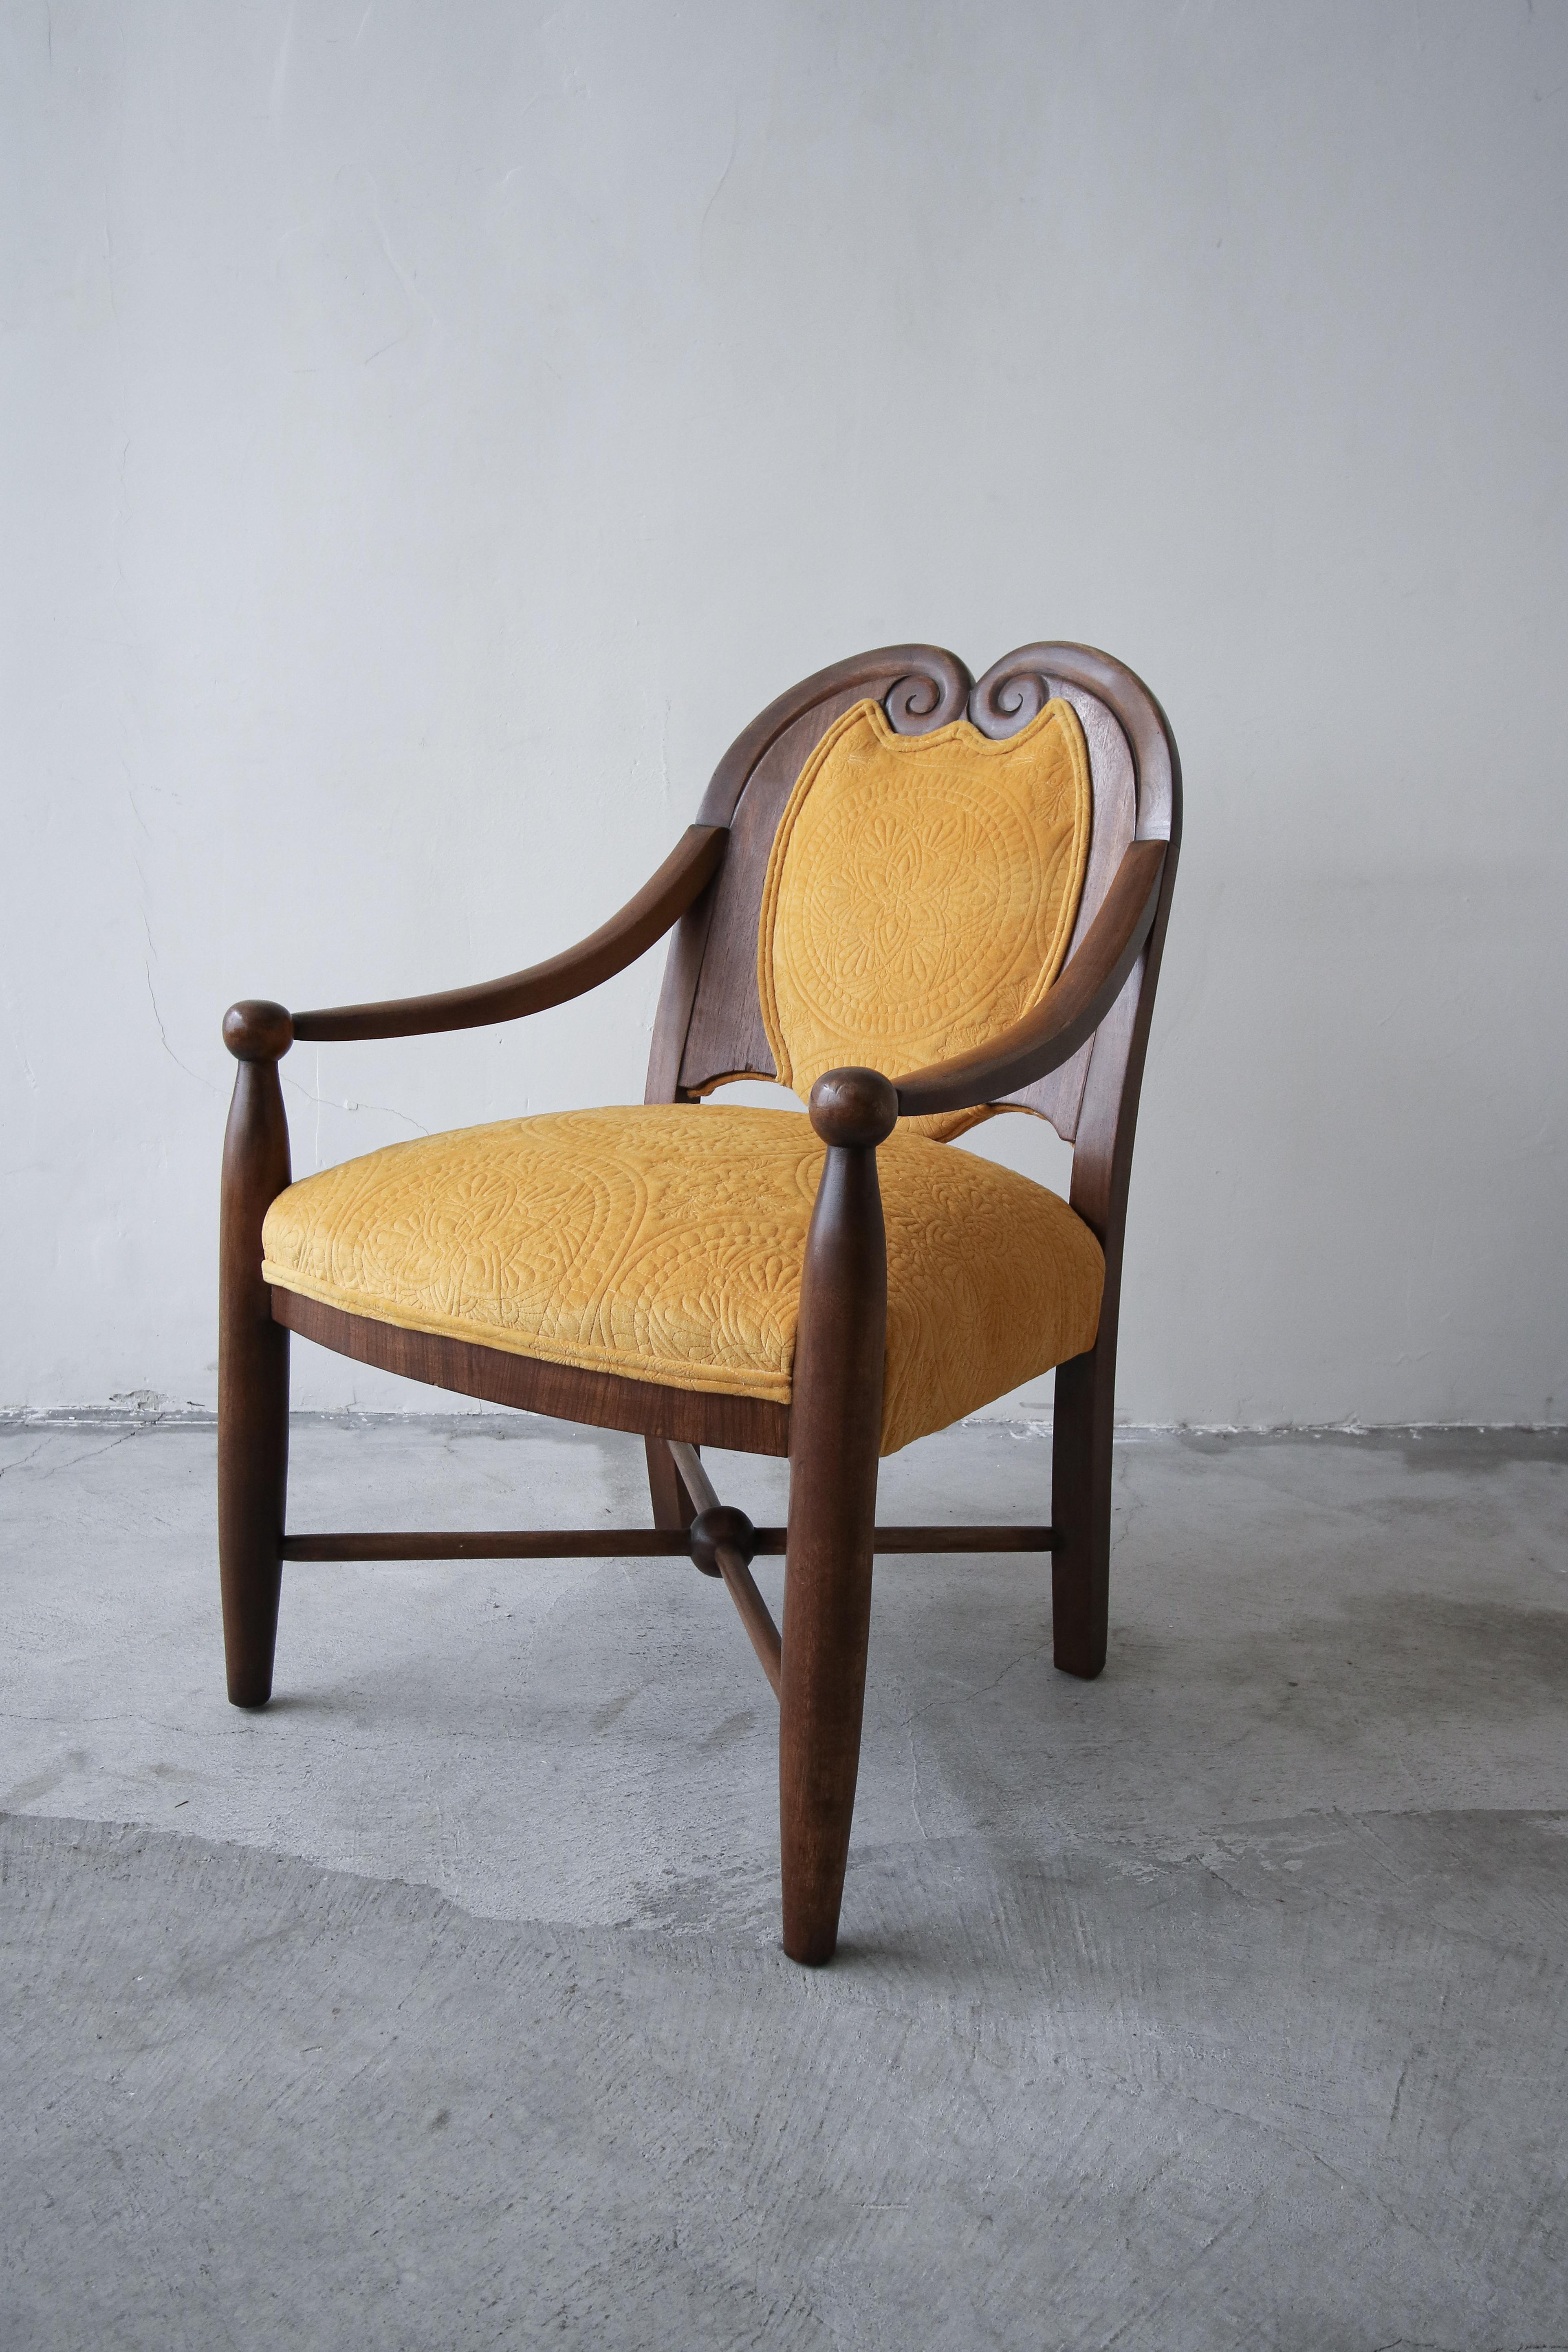 If you are looking for the perfect antique, more traditional style side chair, look no further. This chair and all it's carved wood details is amazing. I don't know that I've seen a more beautiful chair this style. The contrast of the new marigold